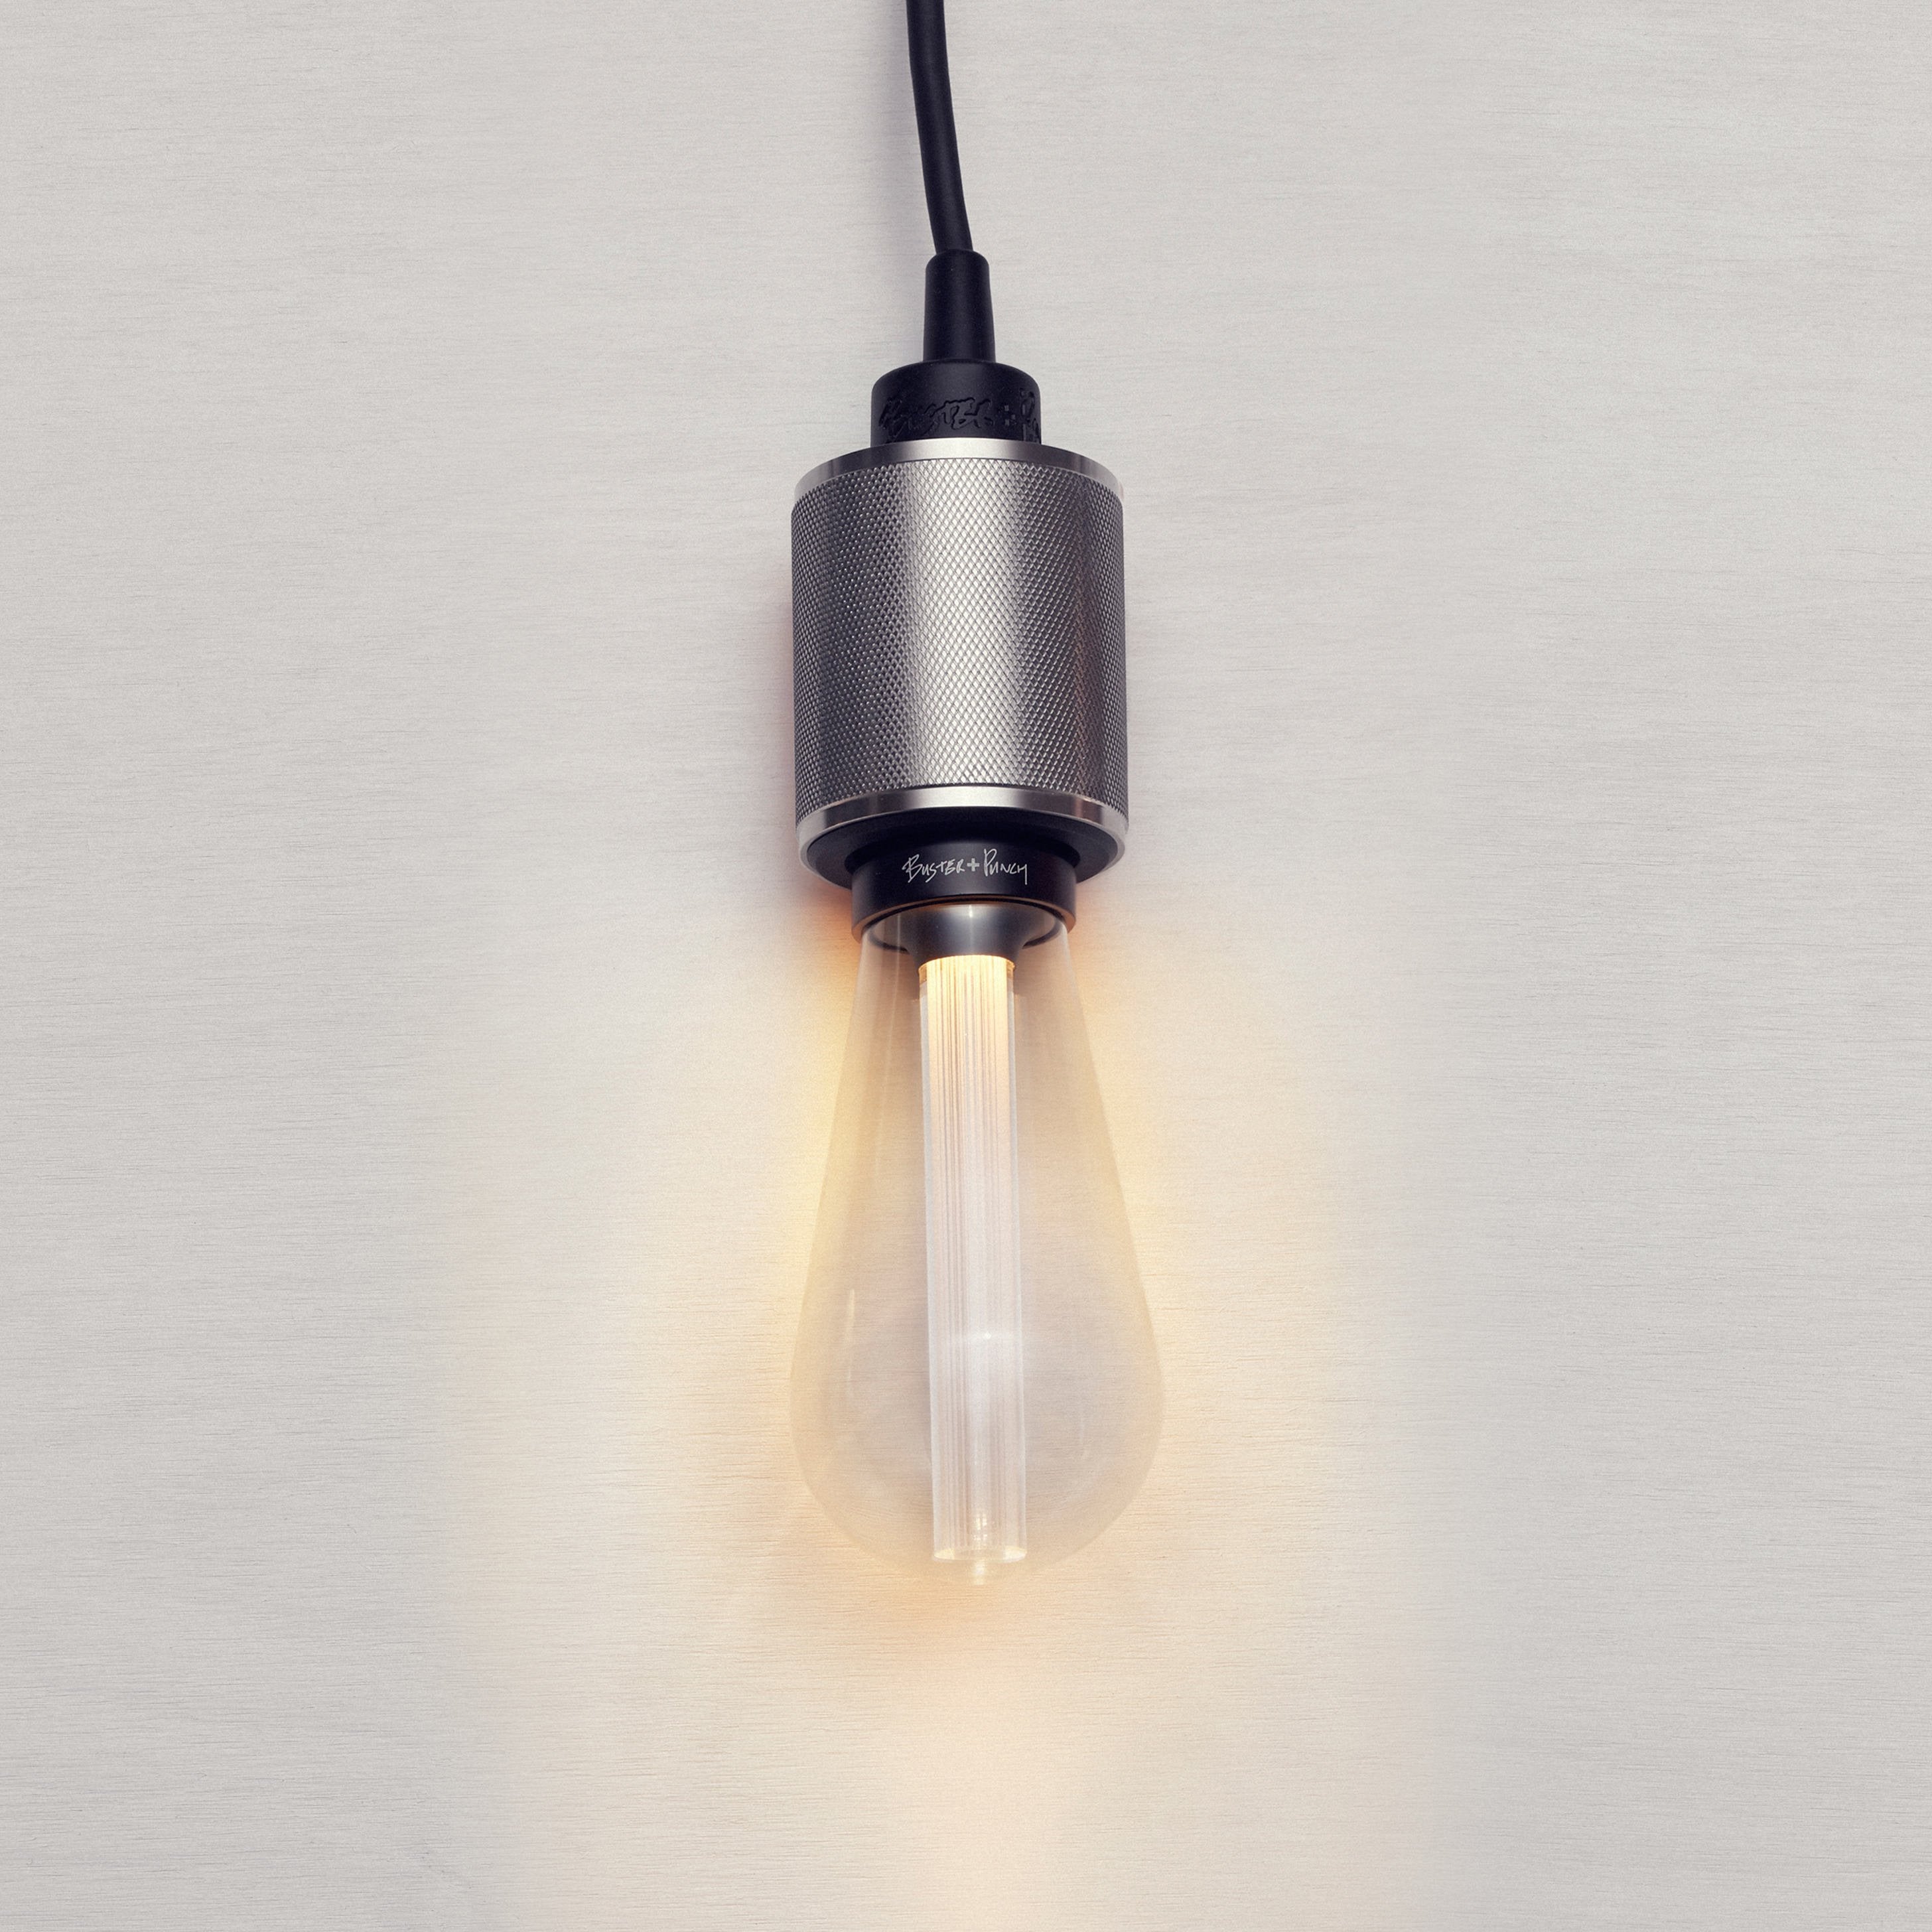 BUSTER BULB / CRYSTAL - DIMMABLE E27